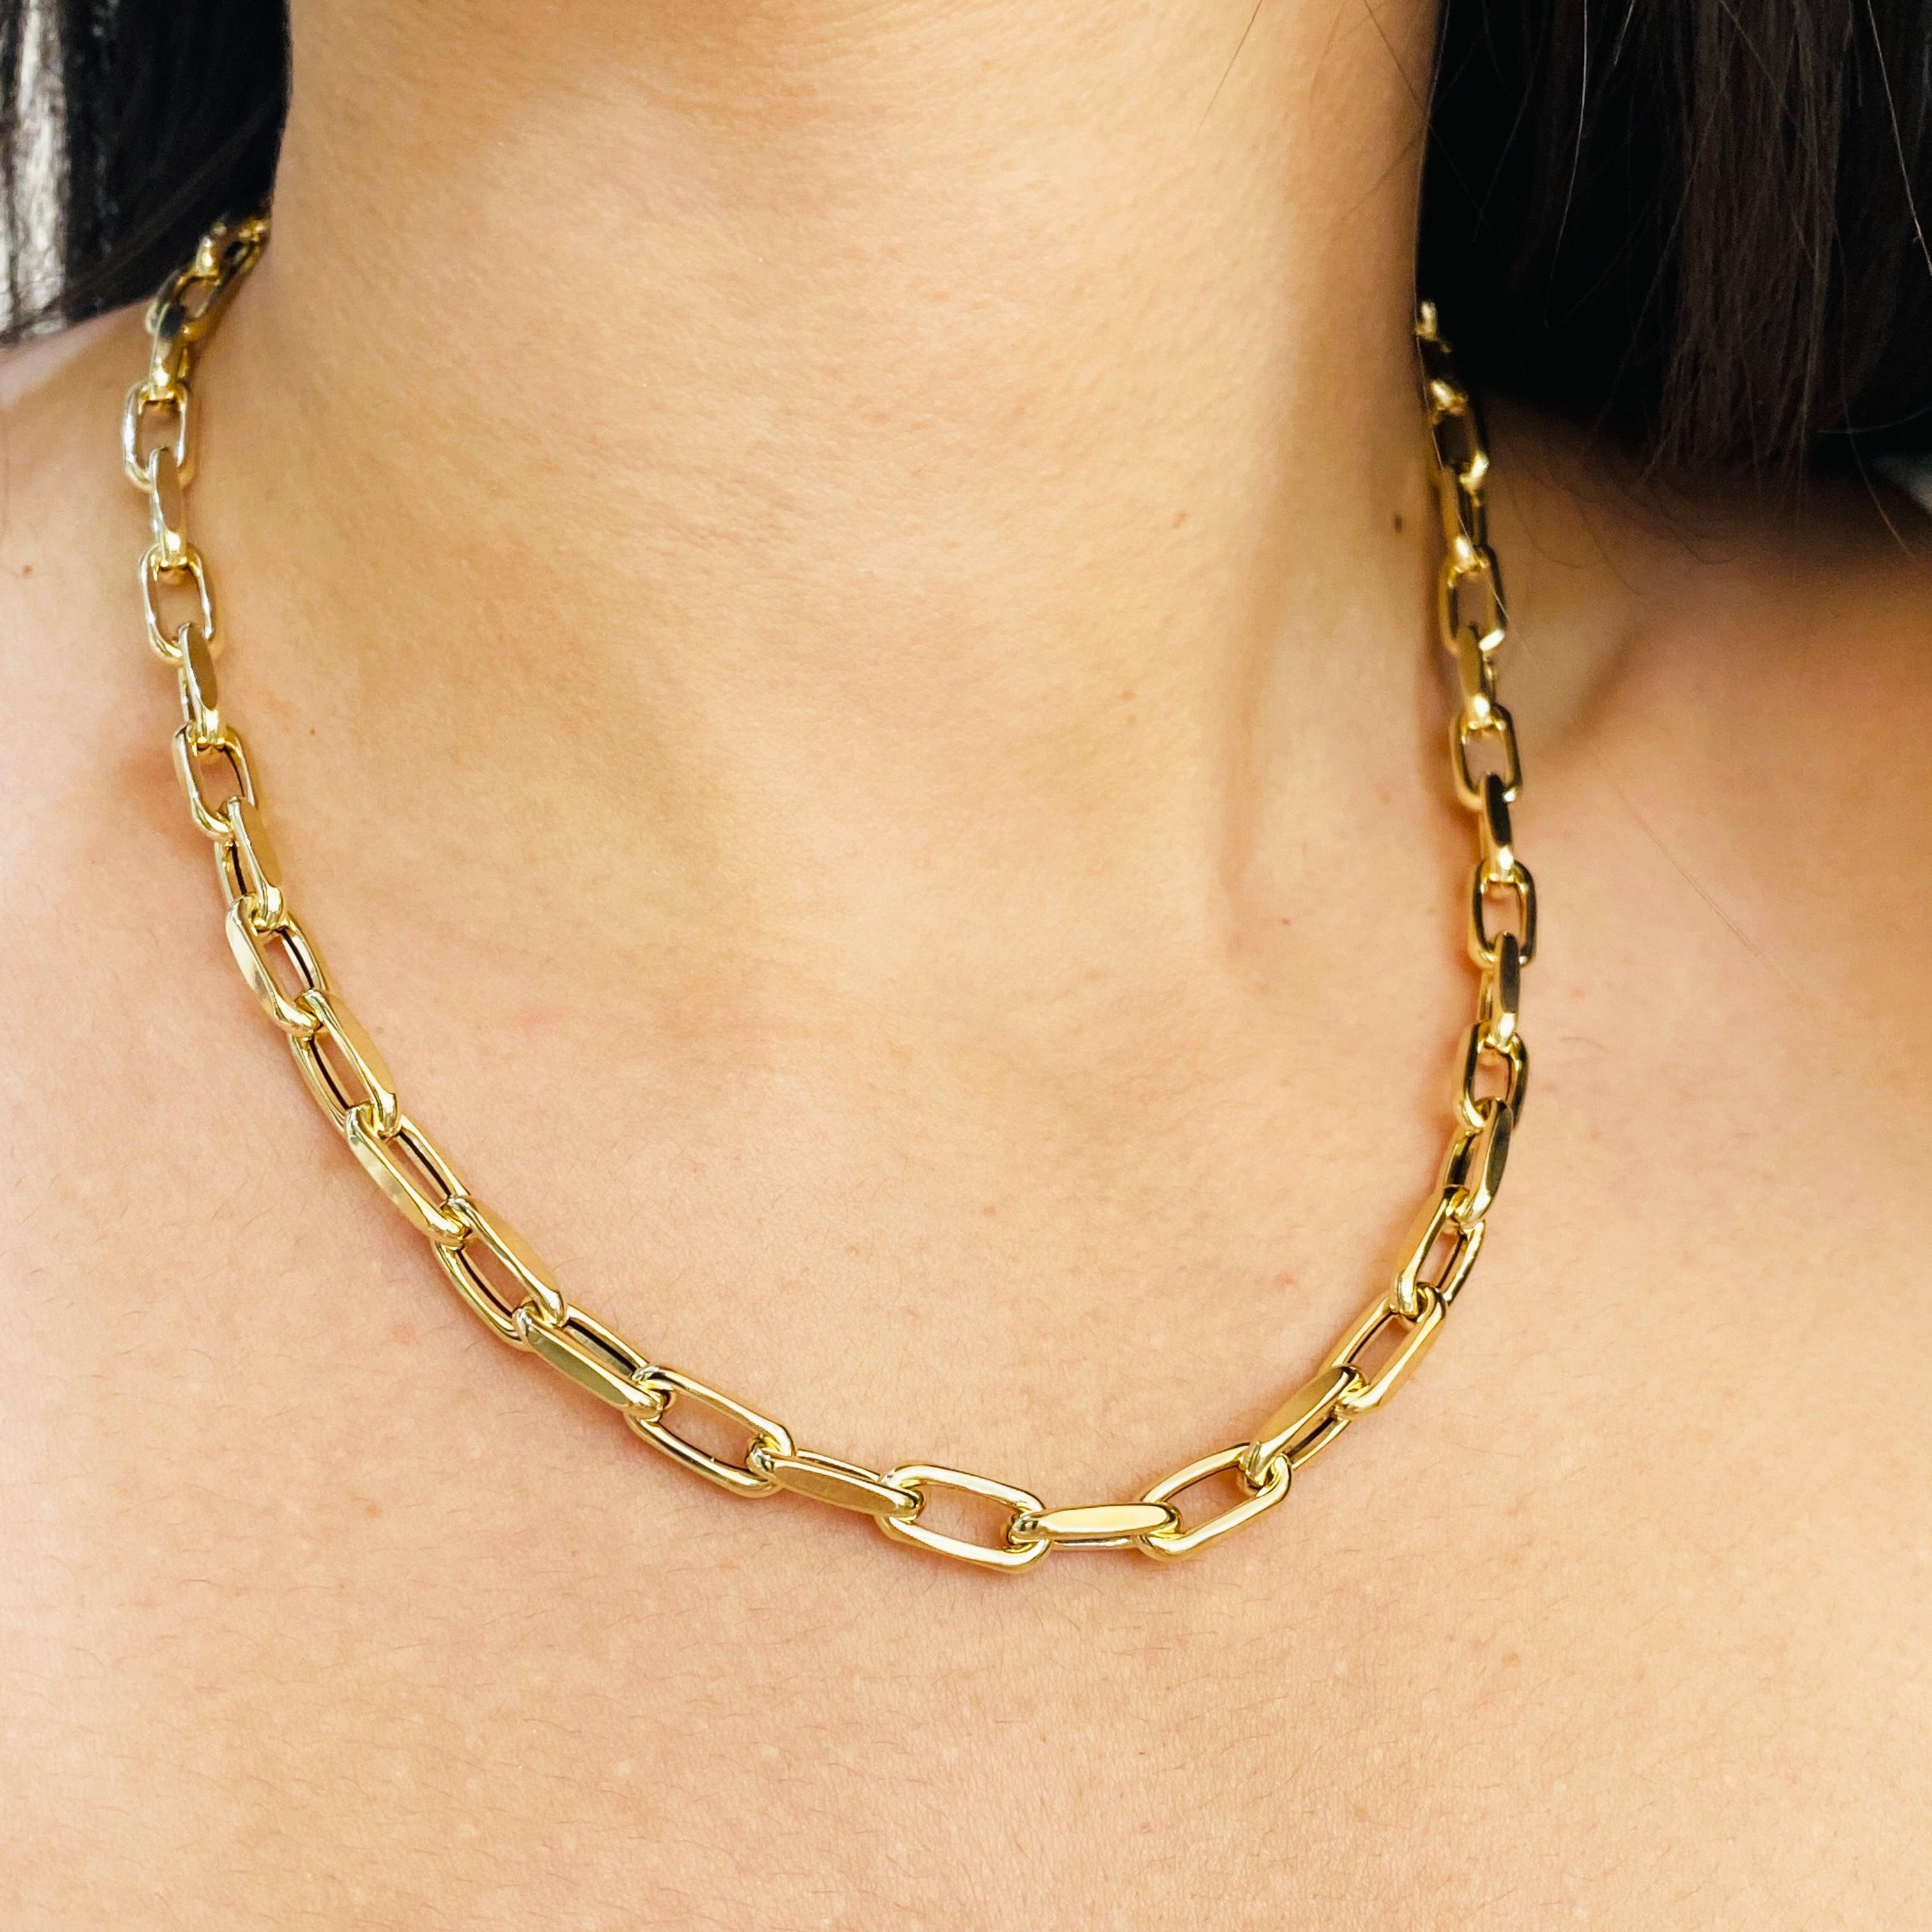 This fantastic 6 millimeter (mm) wide paperclip medium link chain was made for us in Italy with recycled 14 karat gold and finished beautifully to the high standards Italian jewelry is known for! This wonderful statement chain is made affordable by